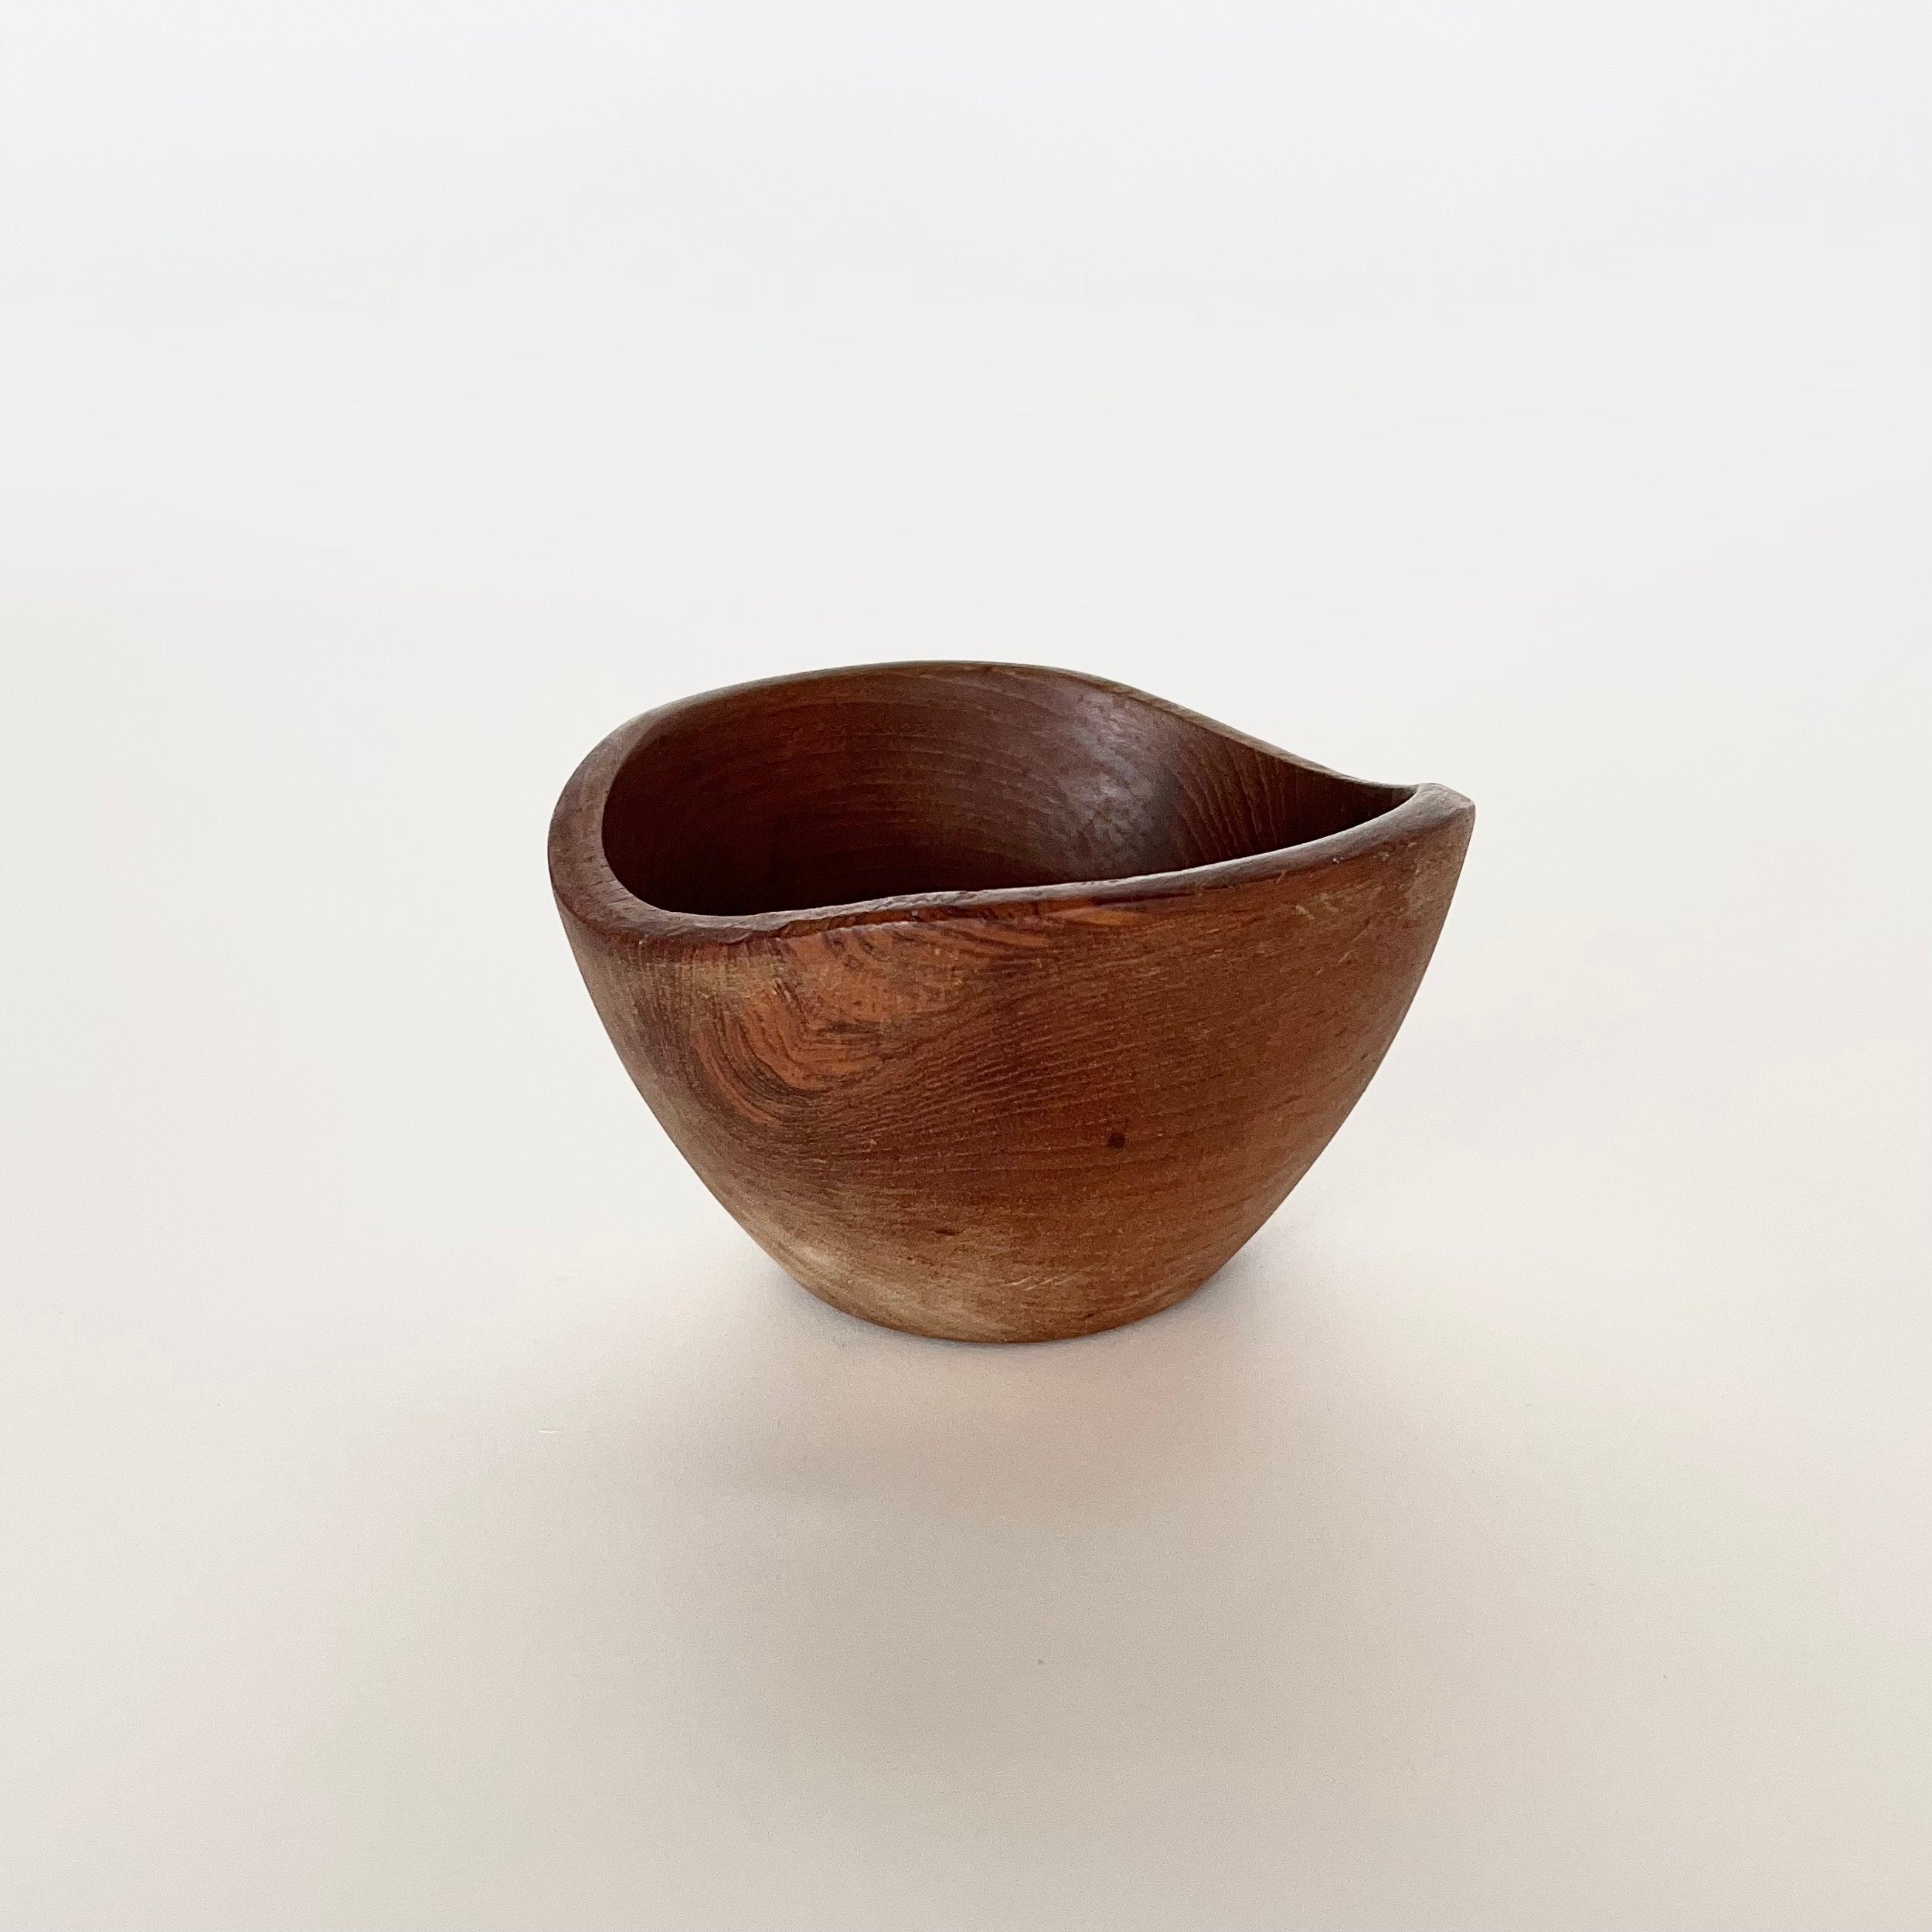 SMALL WOODEN BOWL